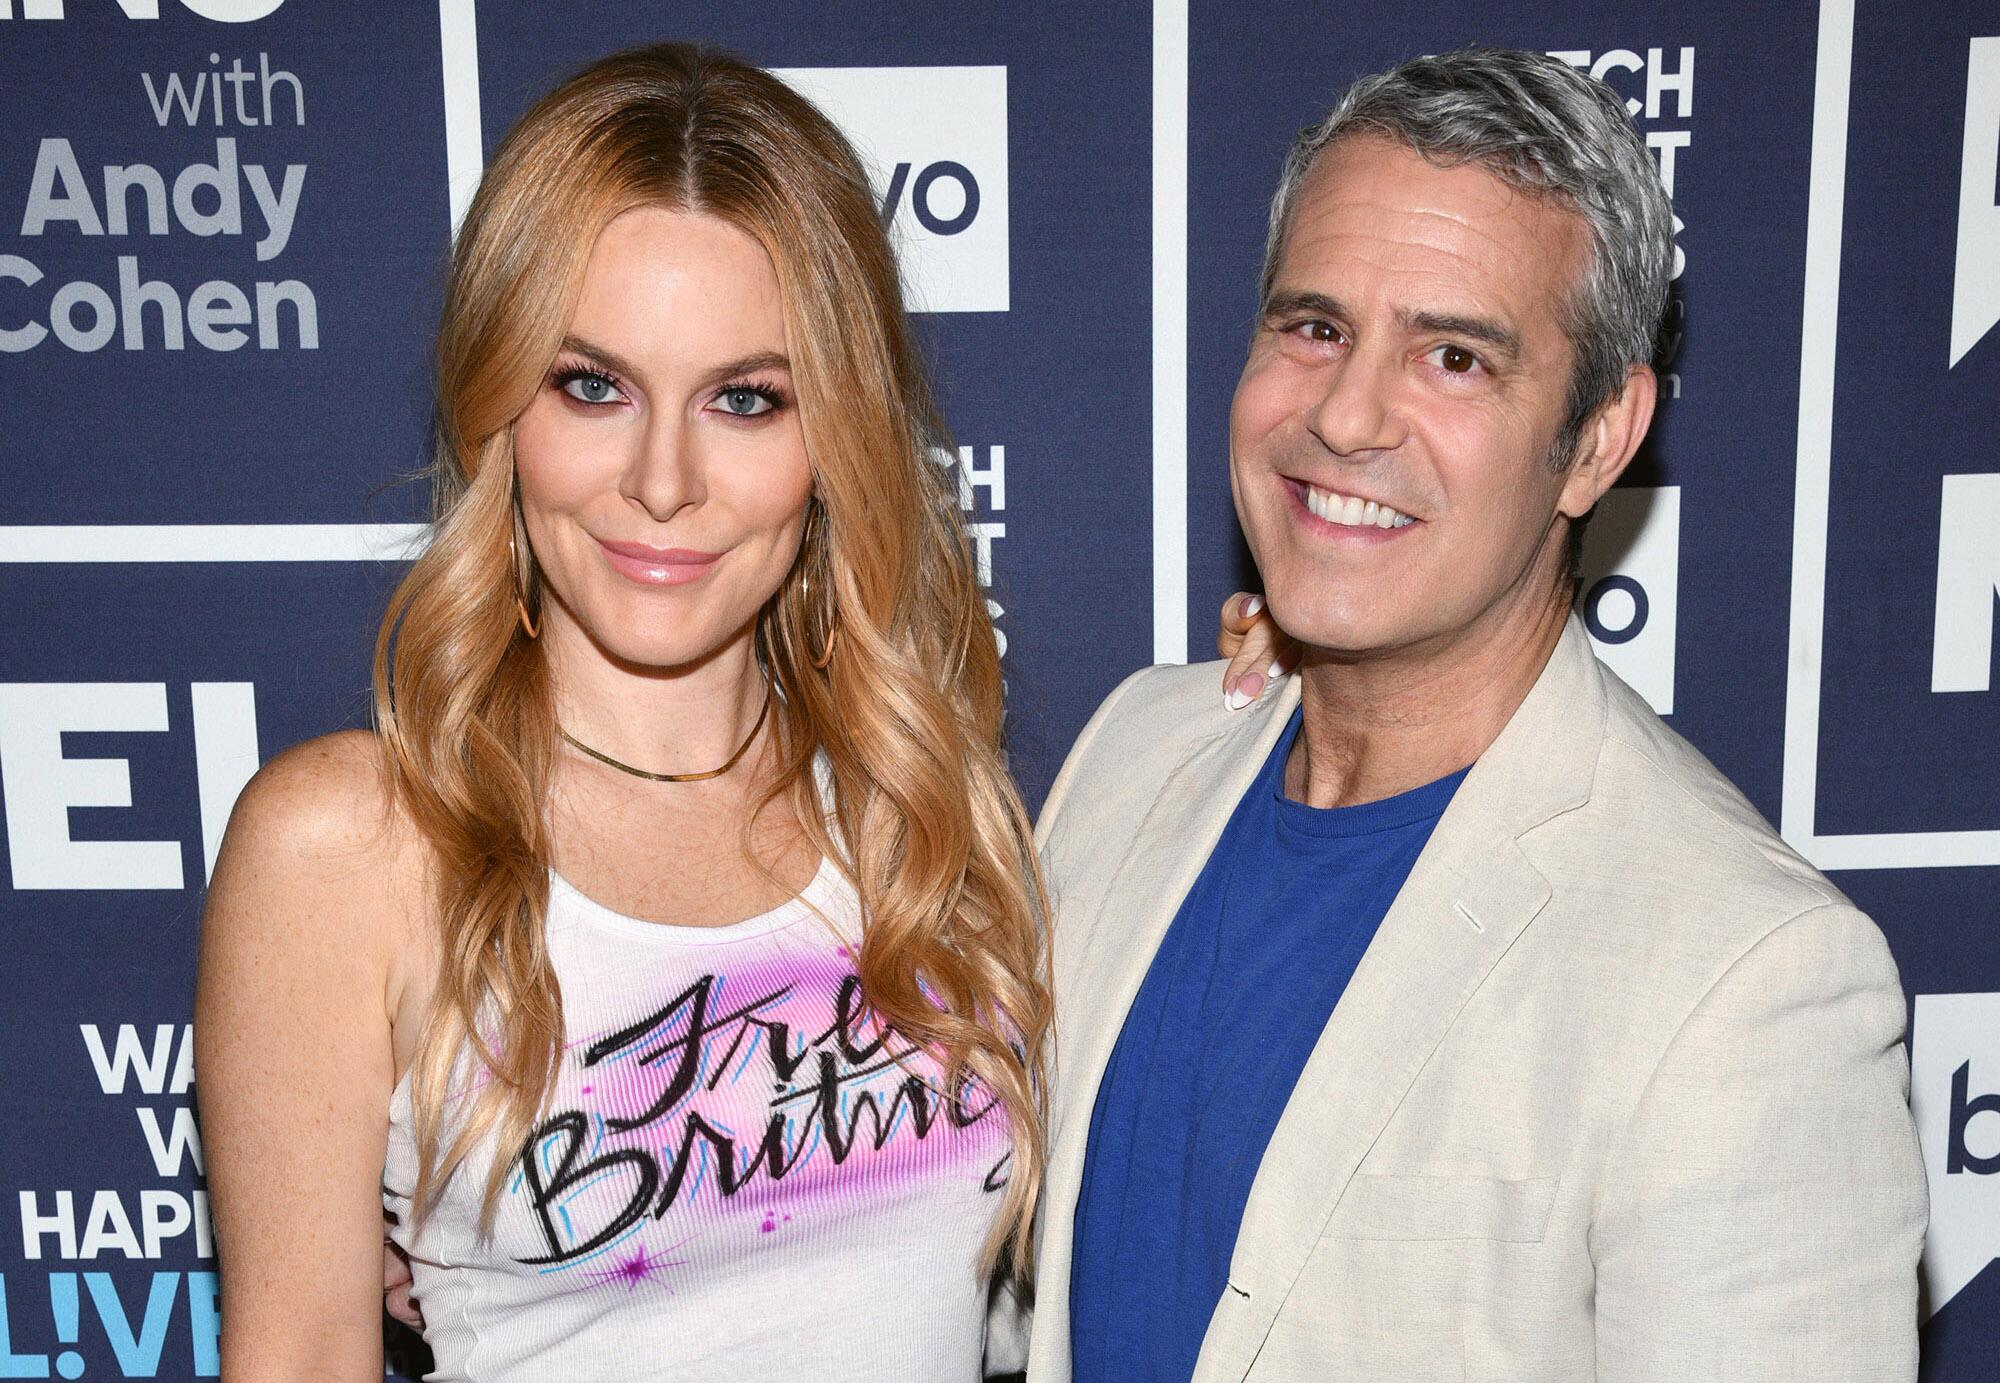 A woman with wavy blond hair in a white tank top stands next to Andy Cohen in a beige suit jacket and blue shirt